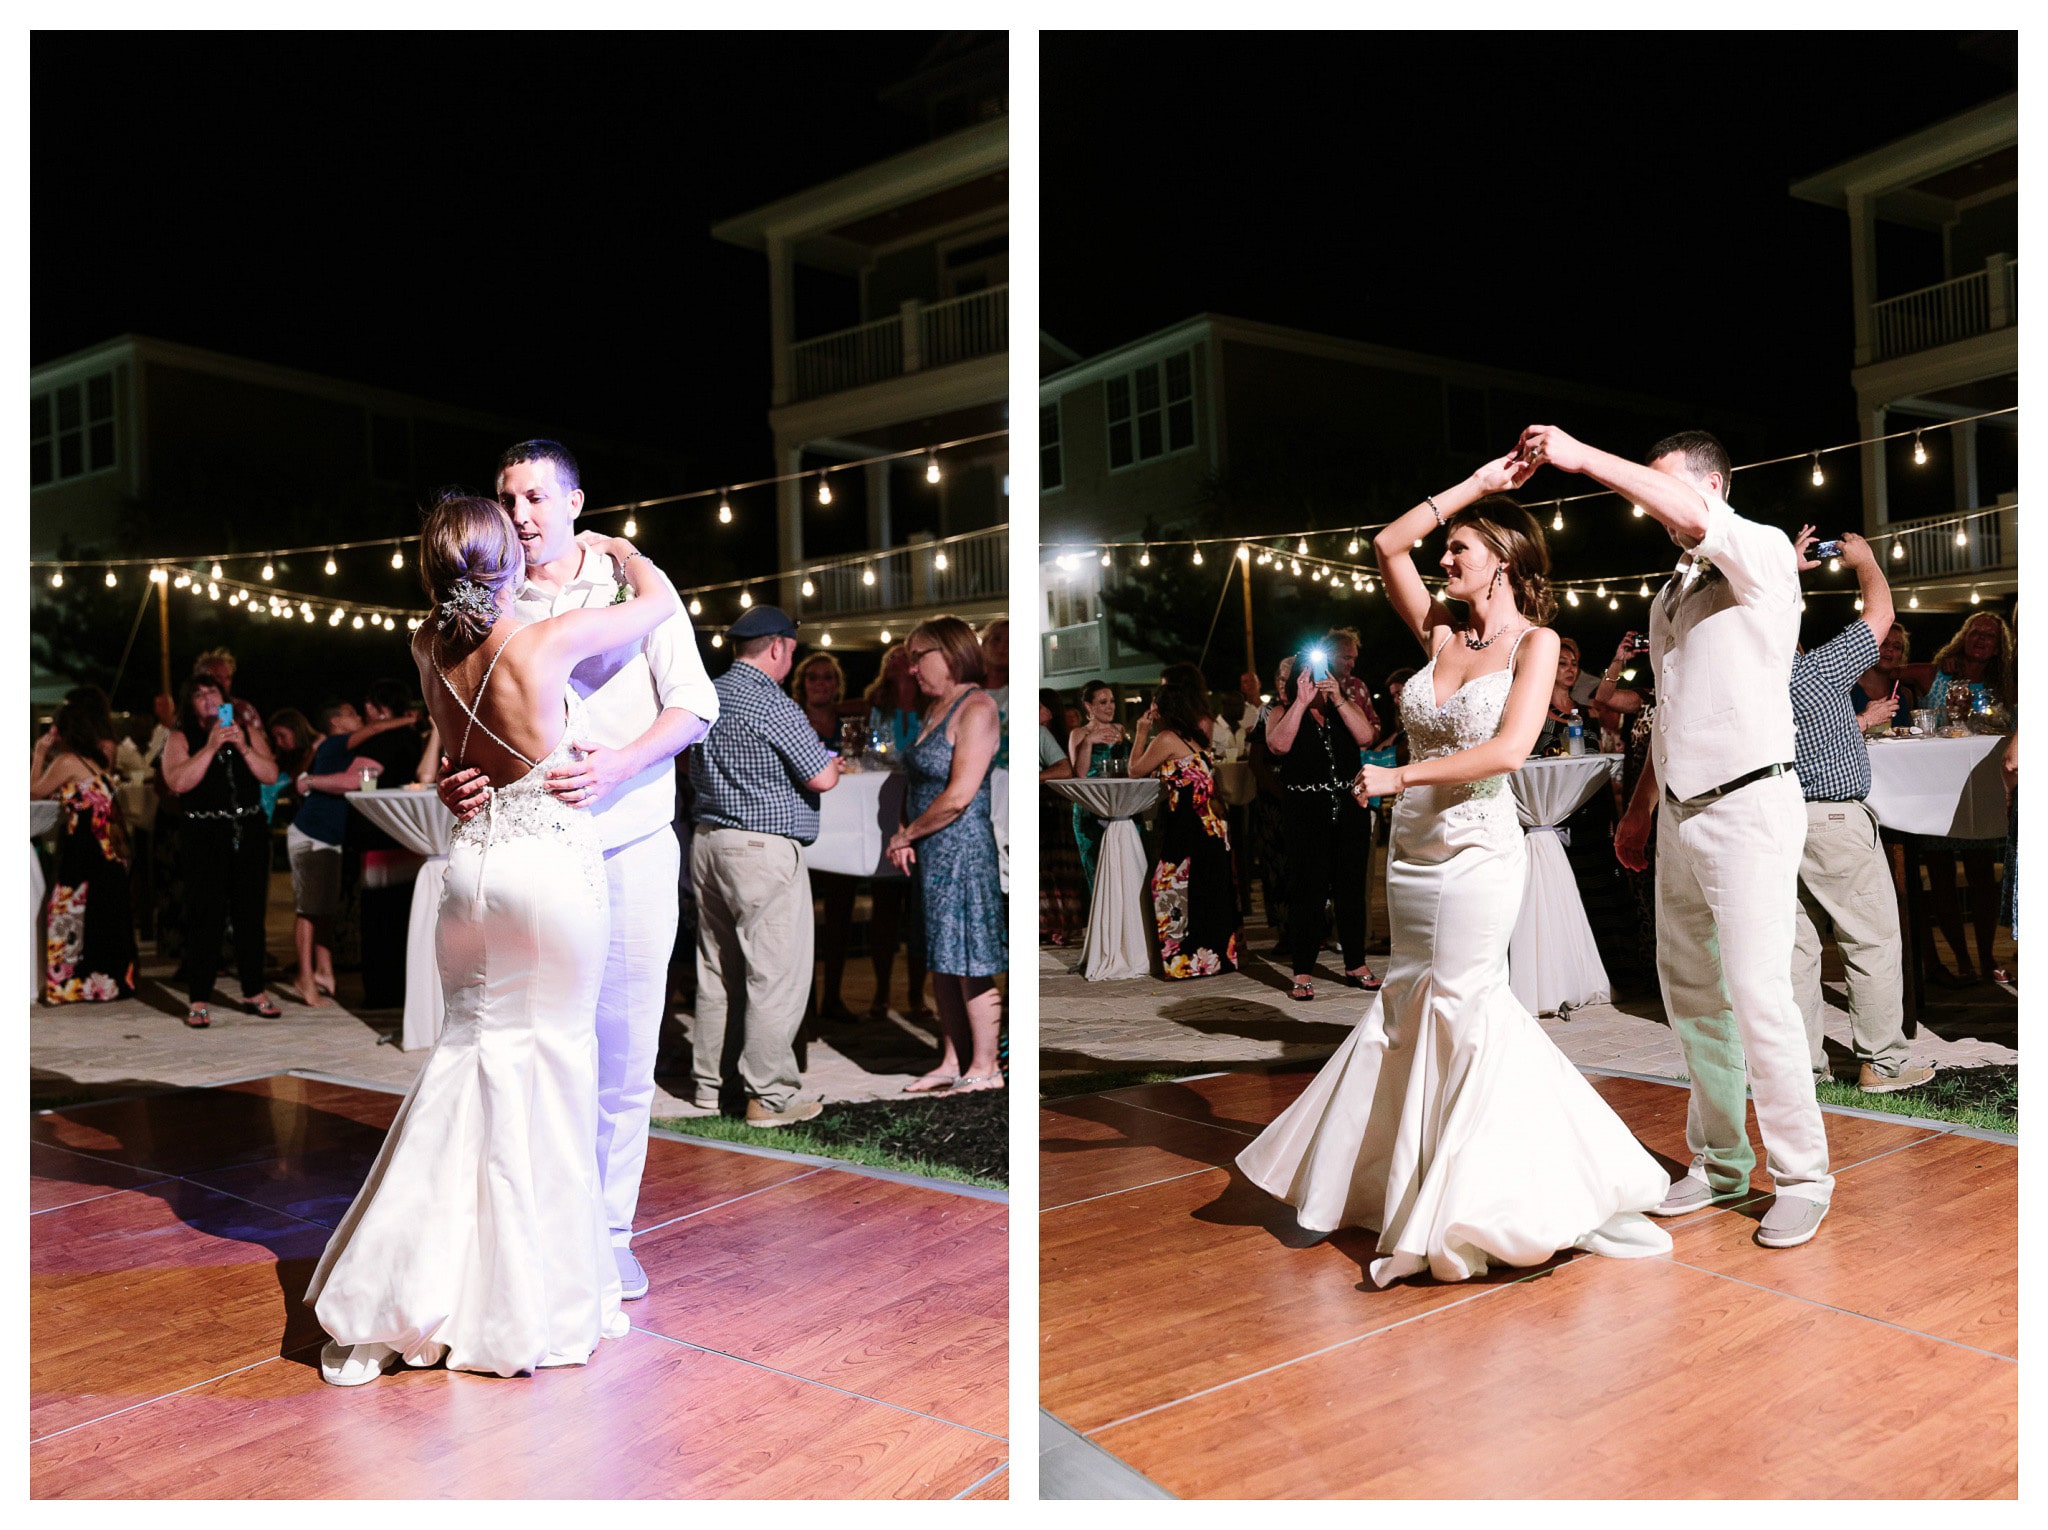 The newlyweds Tearing up the Dance Floor with DJ Scott Shaw - Venue - Beach House Gulf Stream Breeze, Beach Realty Catering and Cake - Buttercream Cakes and Catering, LLC Flowers - Callas Florist Event Rentals - Event Works DJ - Scott Shaw